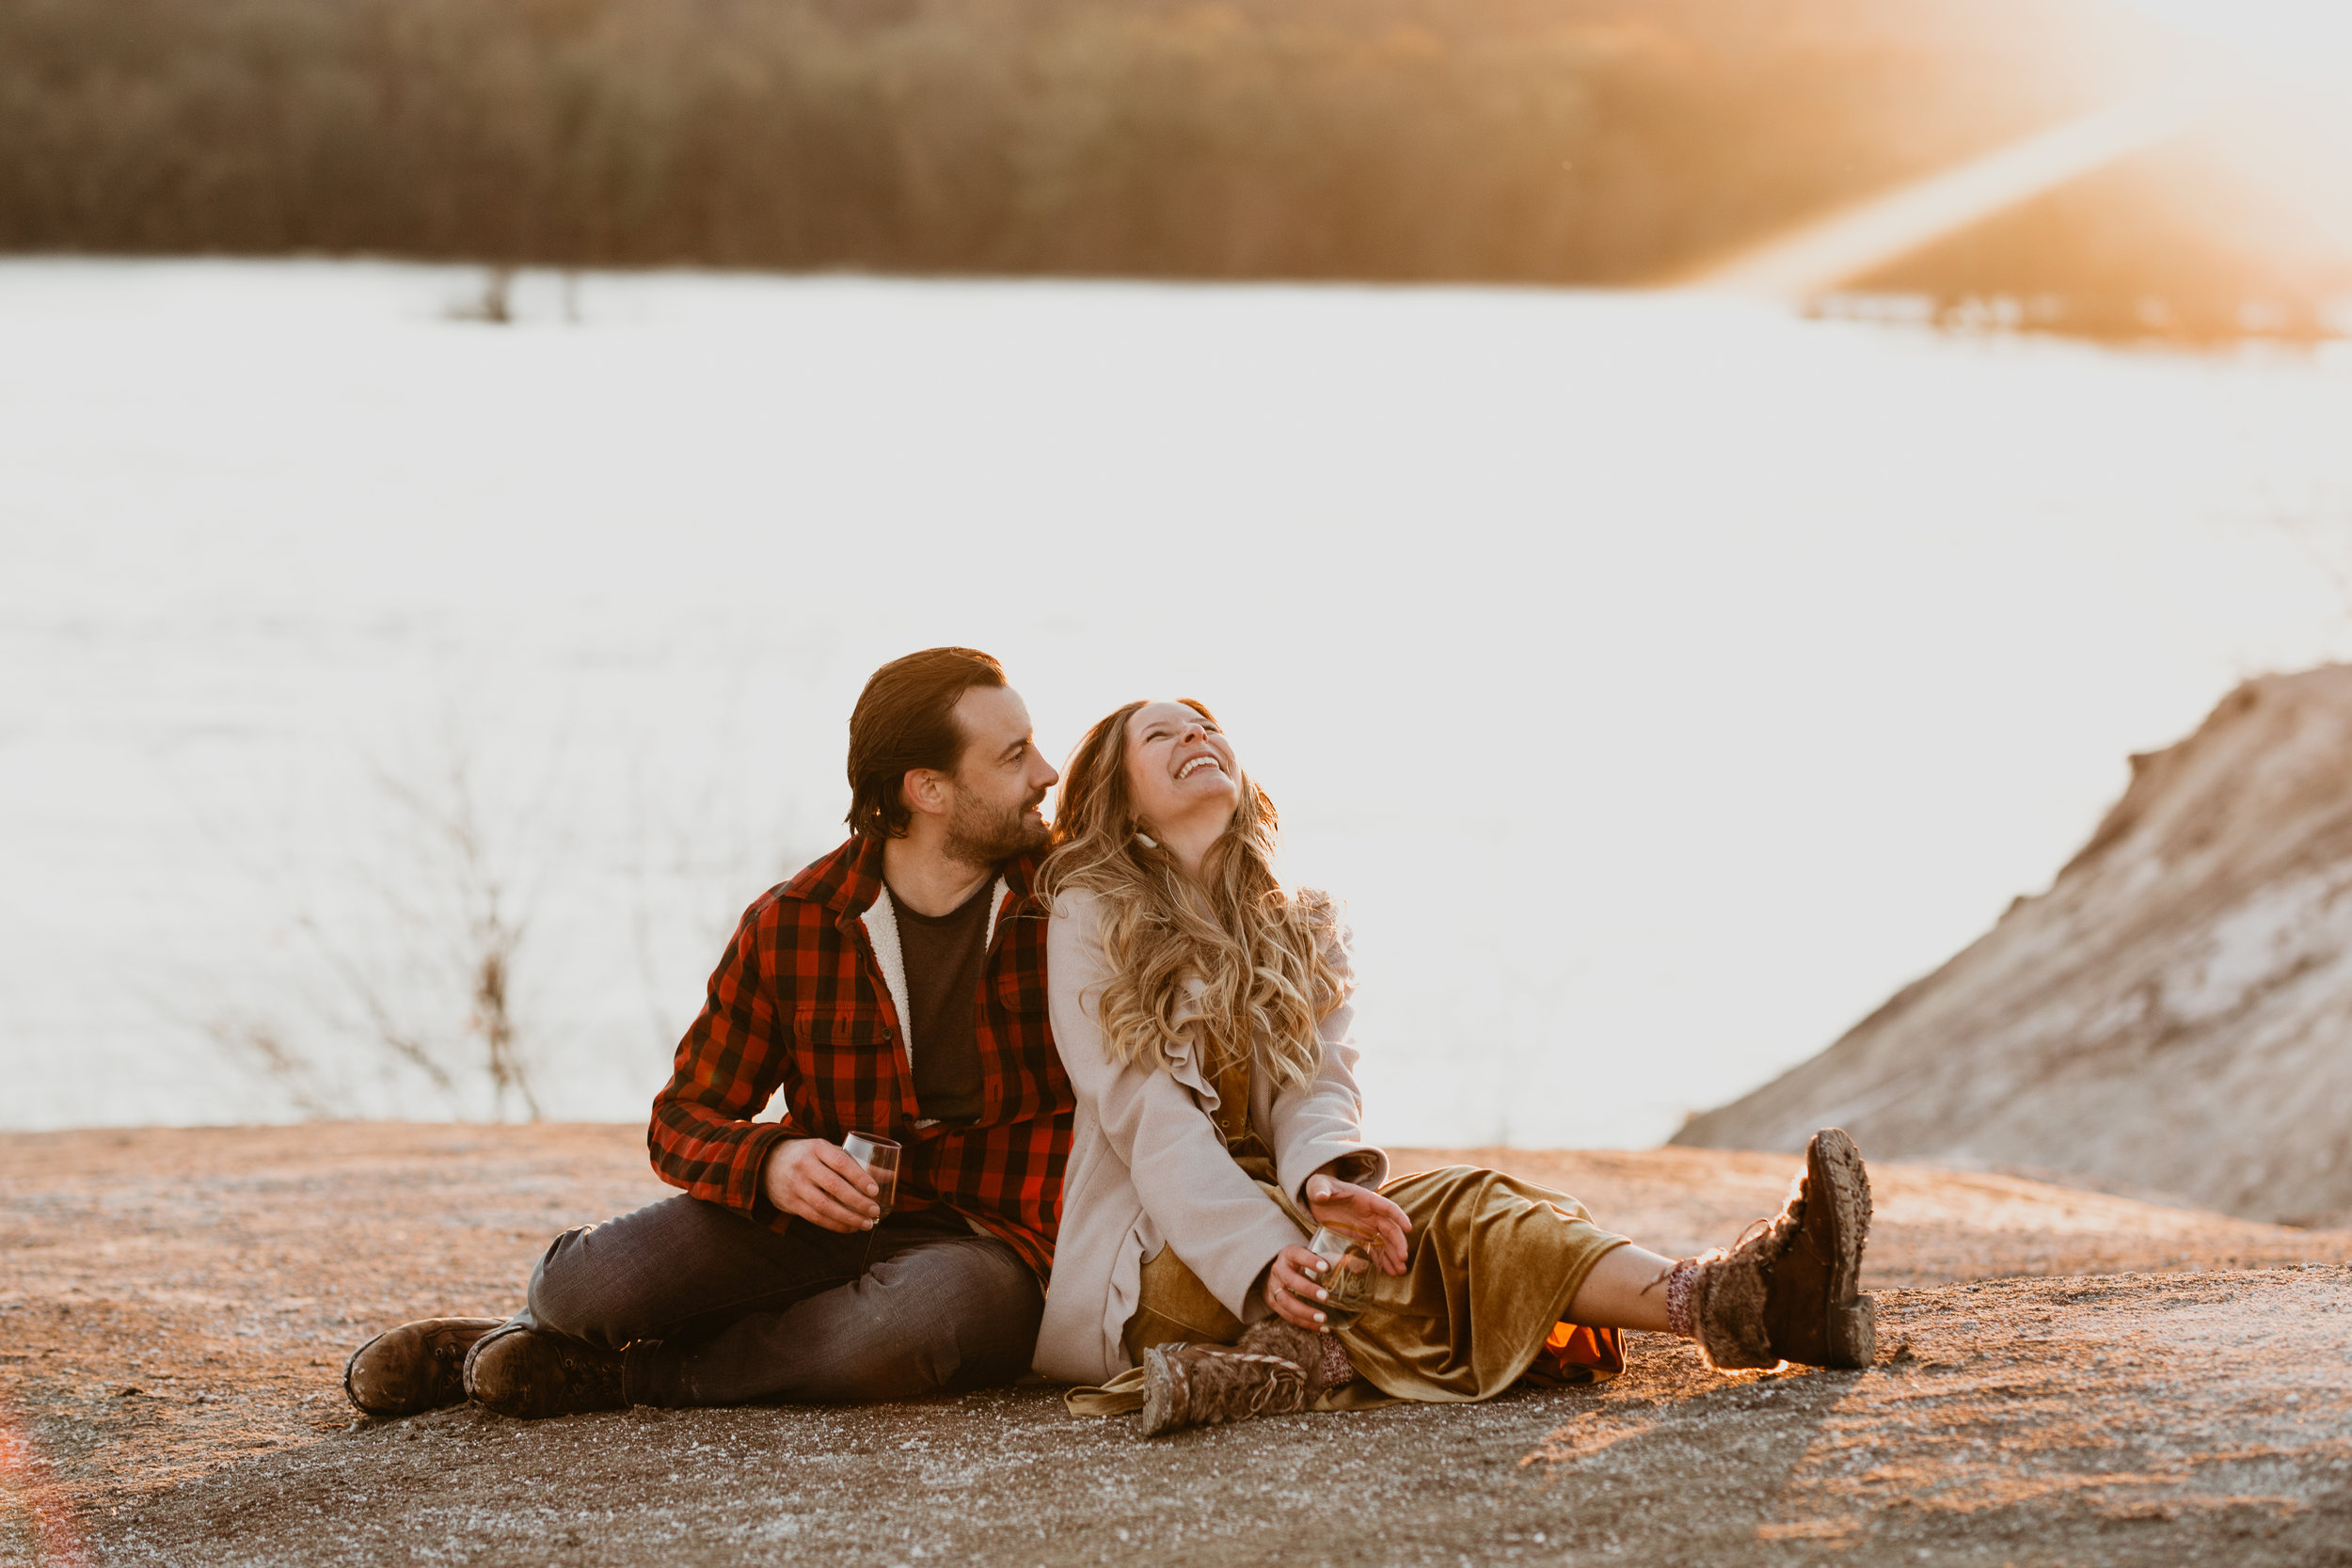 nicole-daacke-photography-white-cliffs-of-conoy-in-lancaster-pa-pennsylvania-adventure-session-adventure-elopement-photographer-engagement session-in-lancaster-pa-photographer-golden-sunset-winter-solstice-wedding-riverside-elopement-5271.jpg